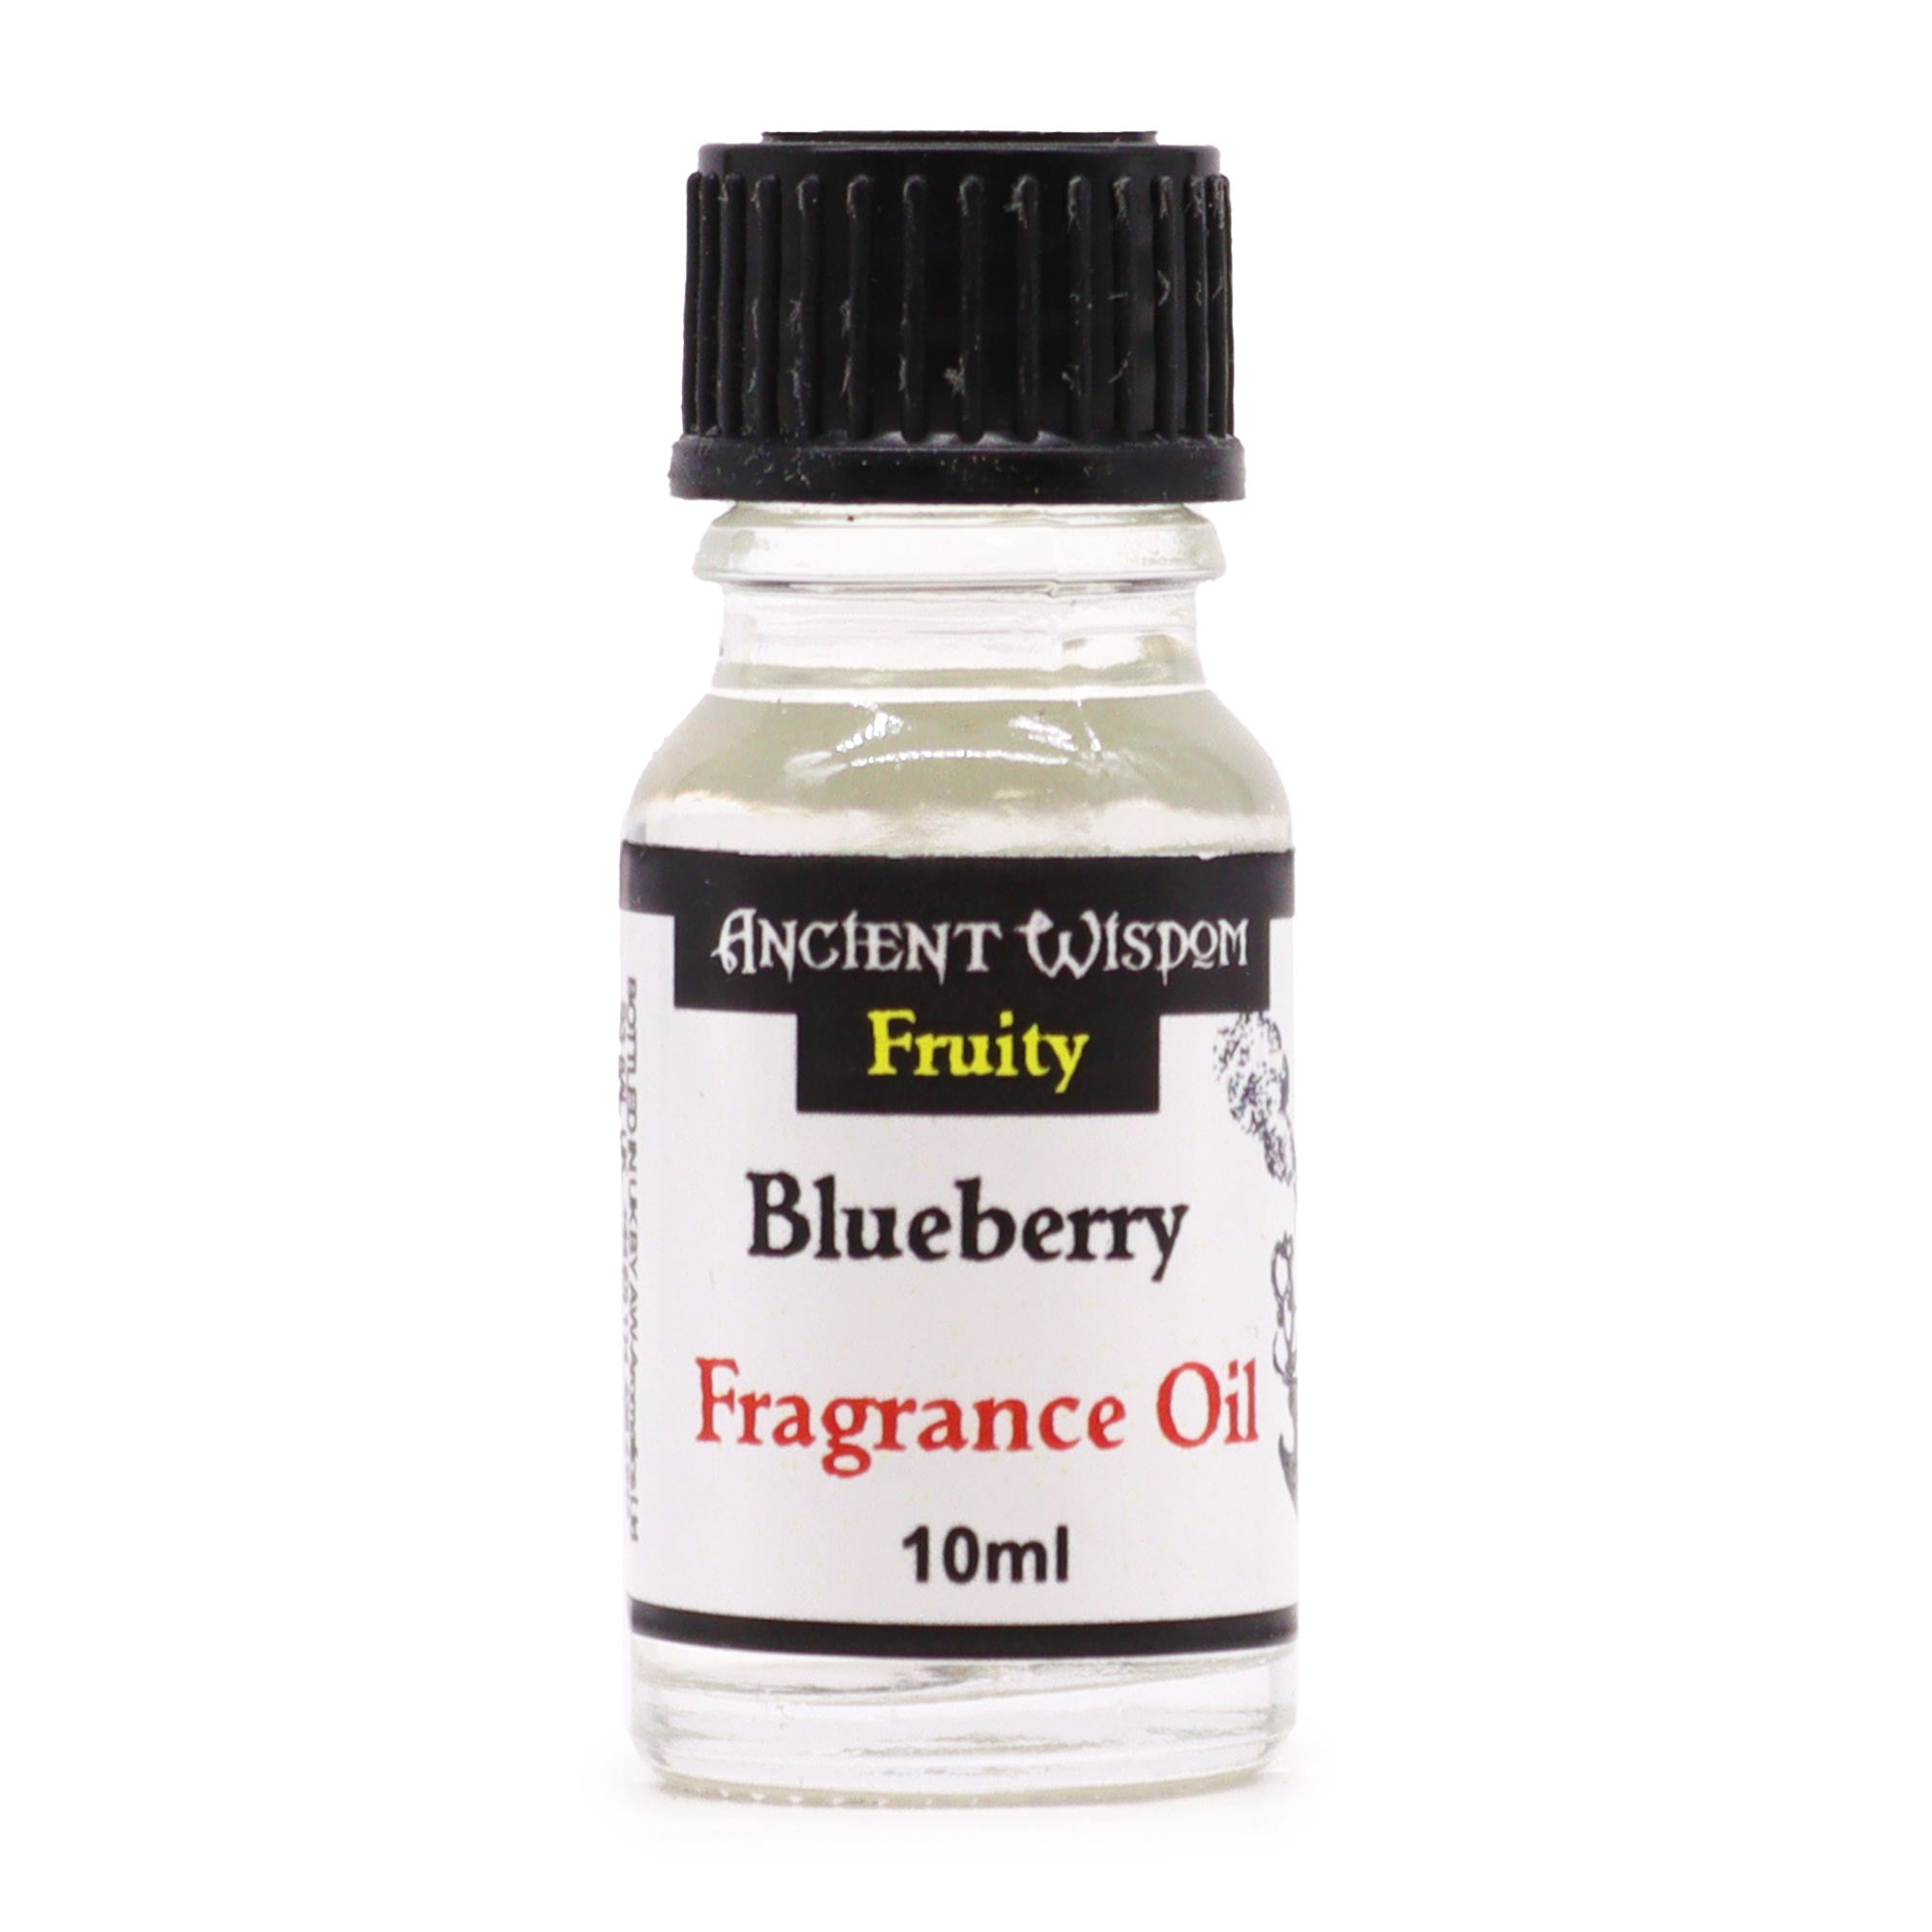 View Blueberry Fragrance Oil 10ml information